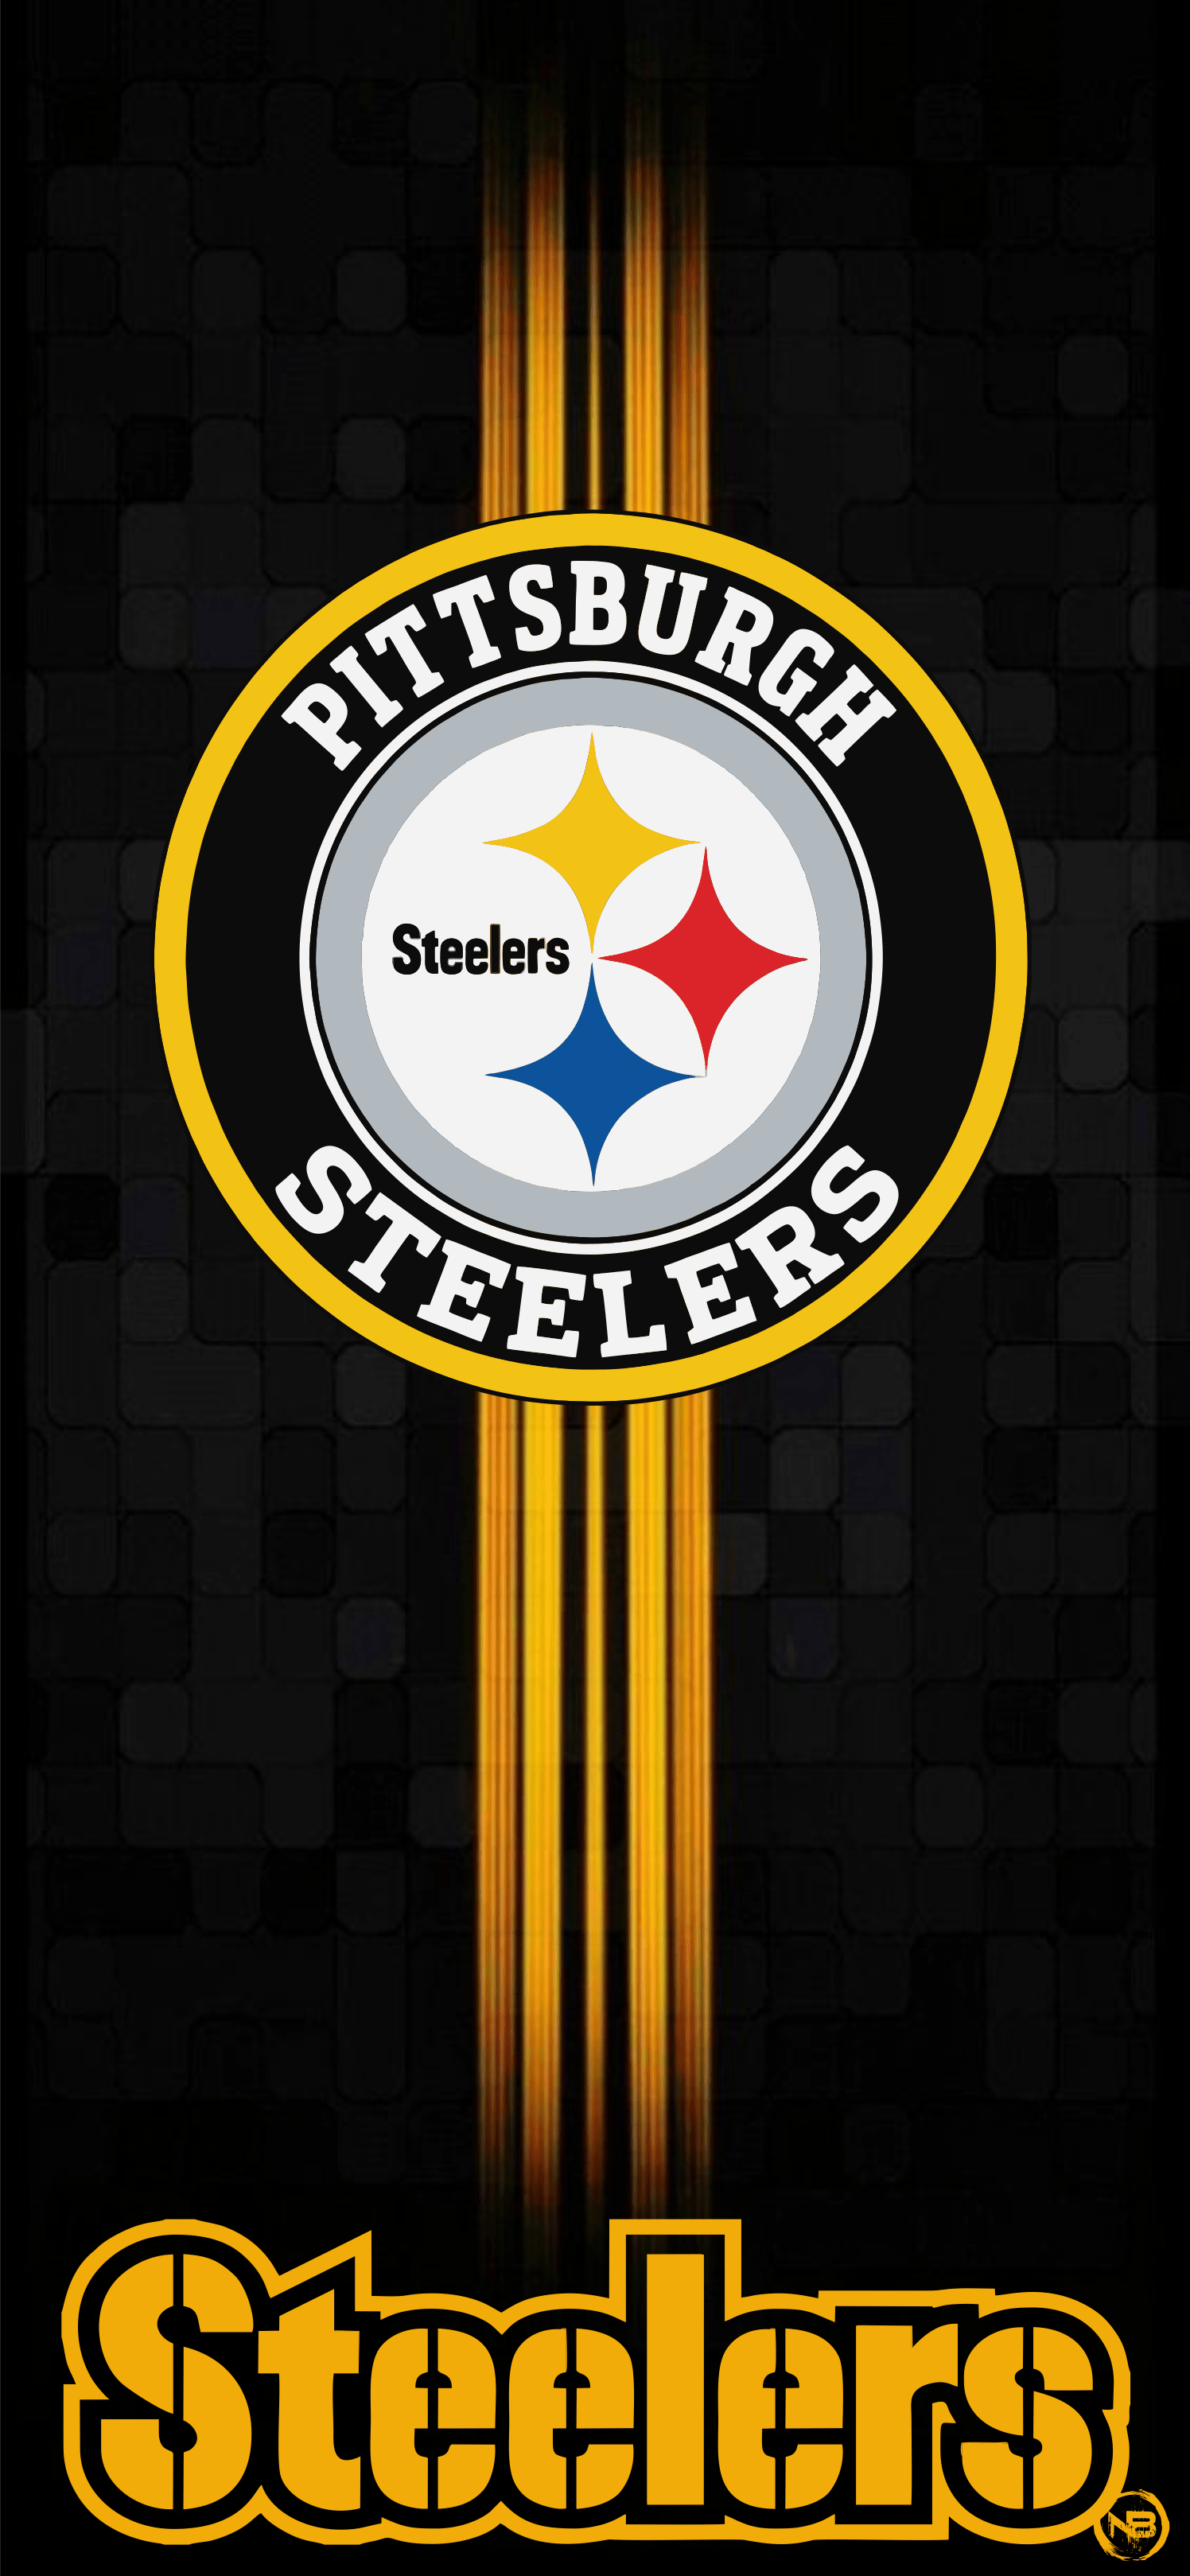 10 Most Popular Steelers Wallpapers For Iphone FULL HD 19201080 For PC  Desktop 2019  Iphone wallpaper Logo wallpaper hd Best iphone wallpapers